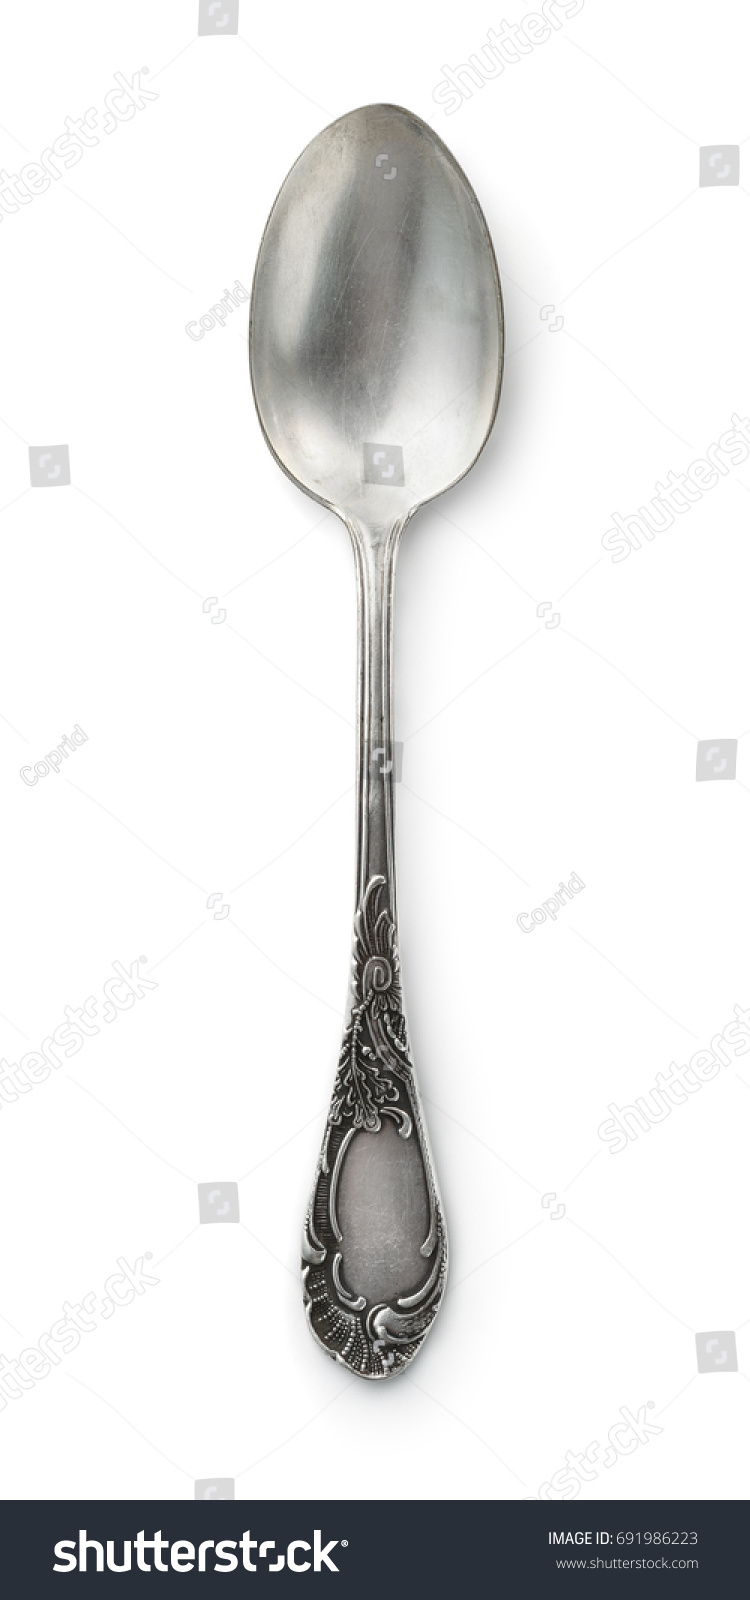 Top view of old silver tea spoon isolated on white #691986223